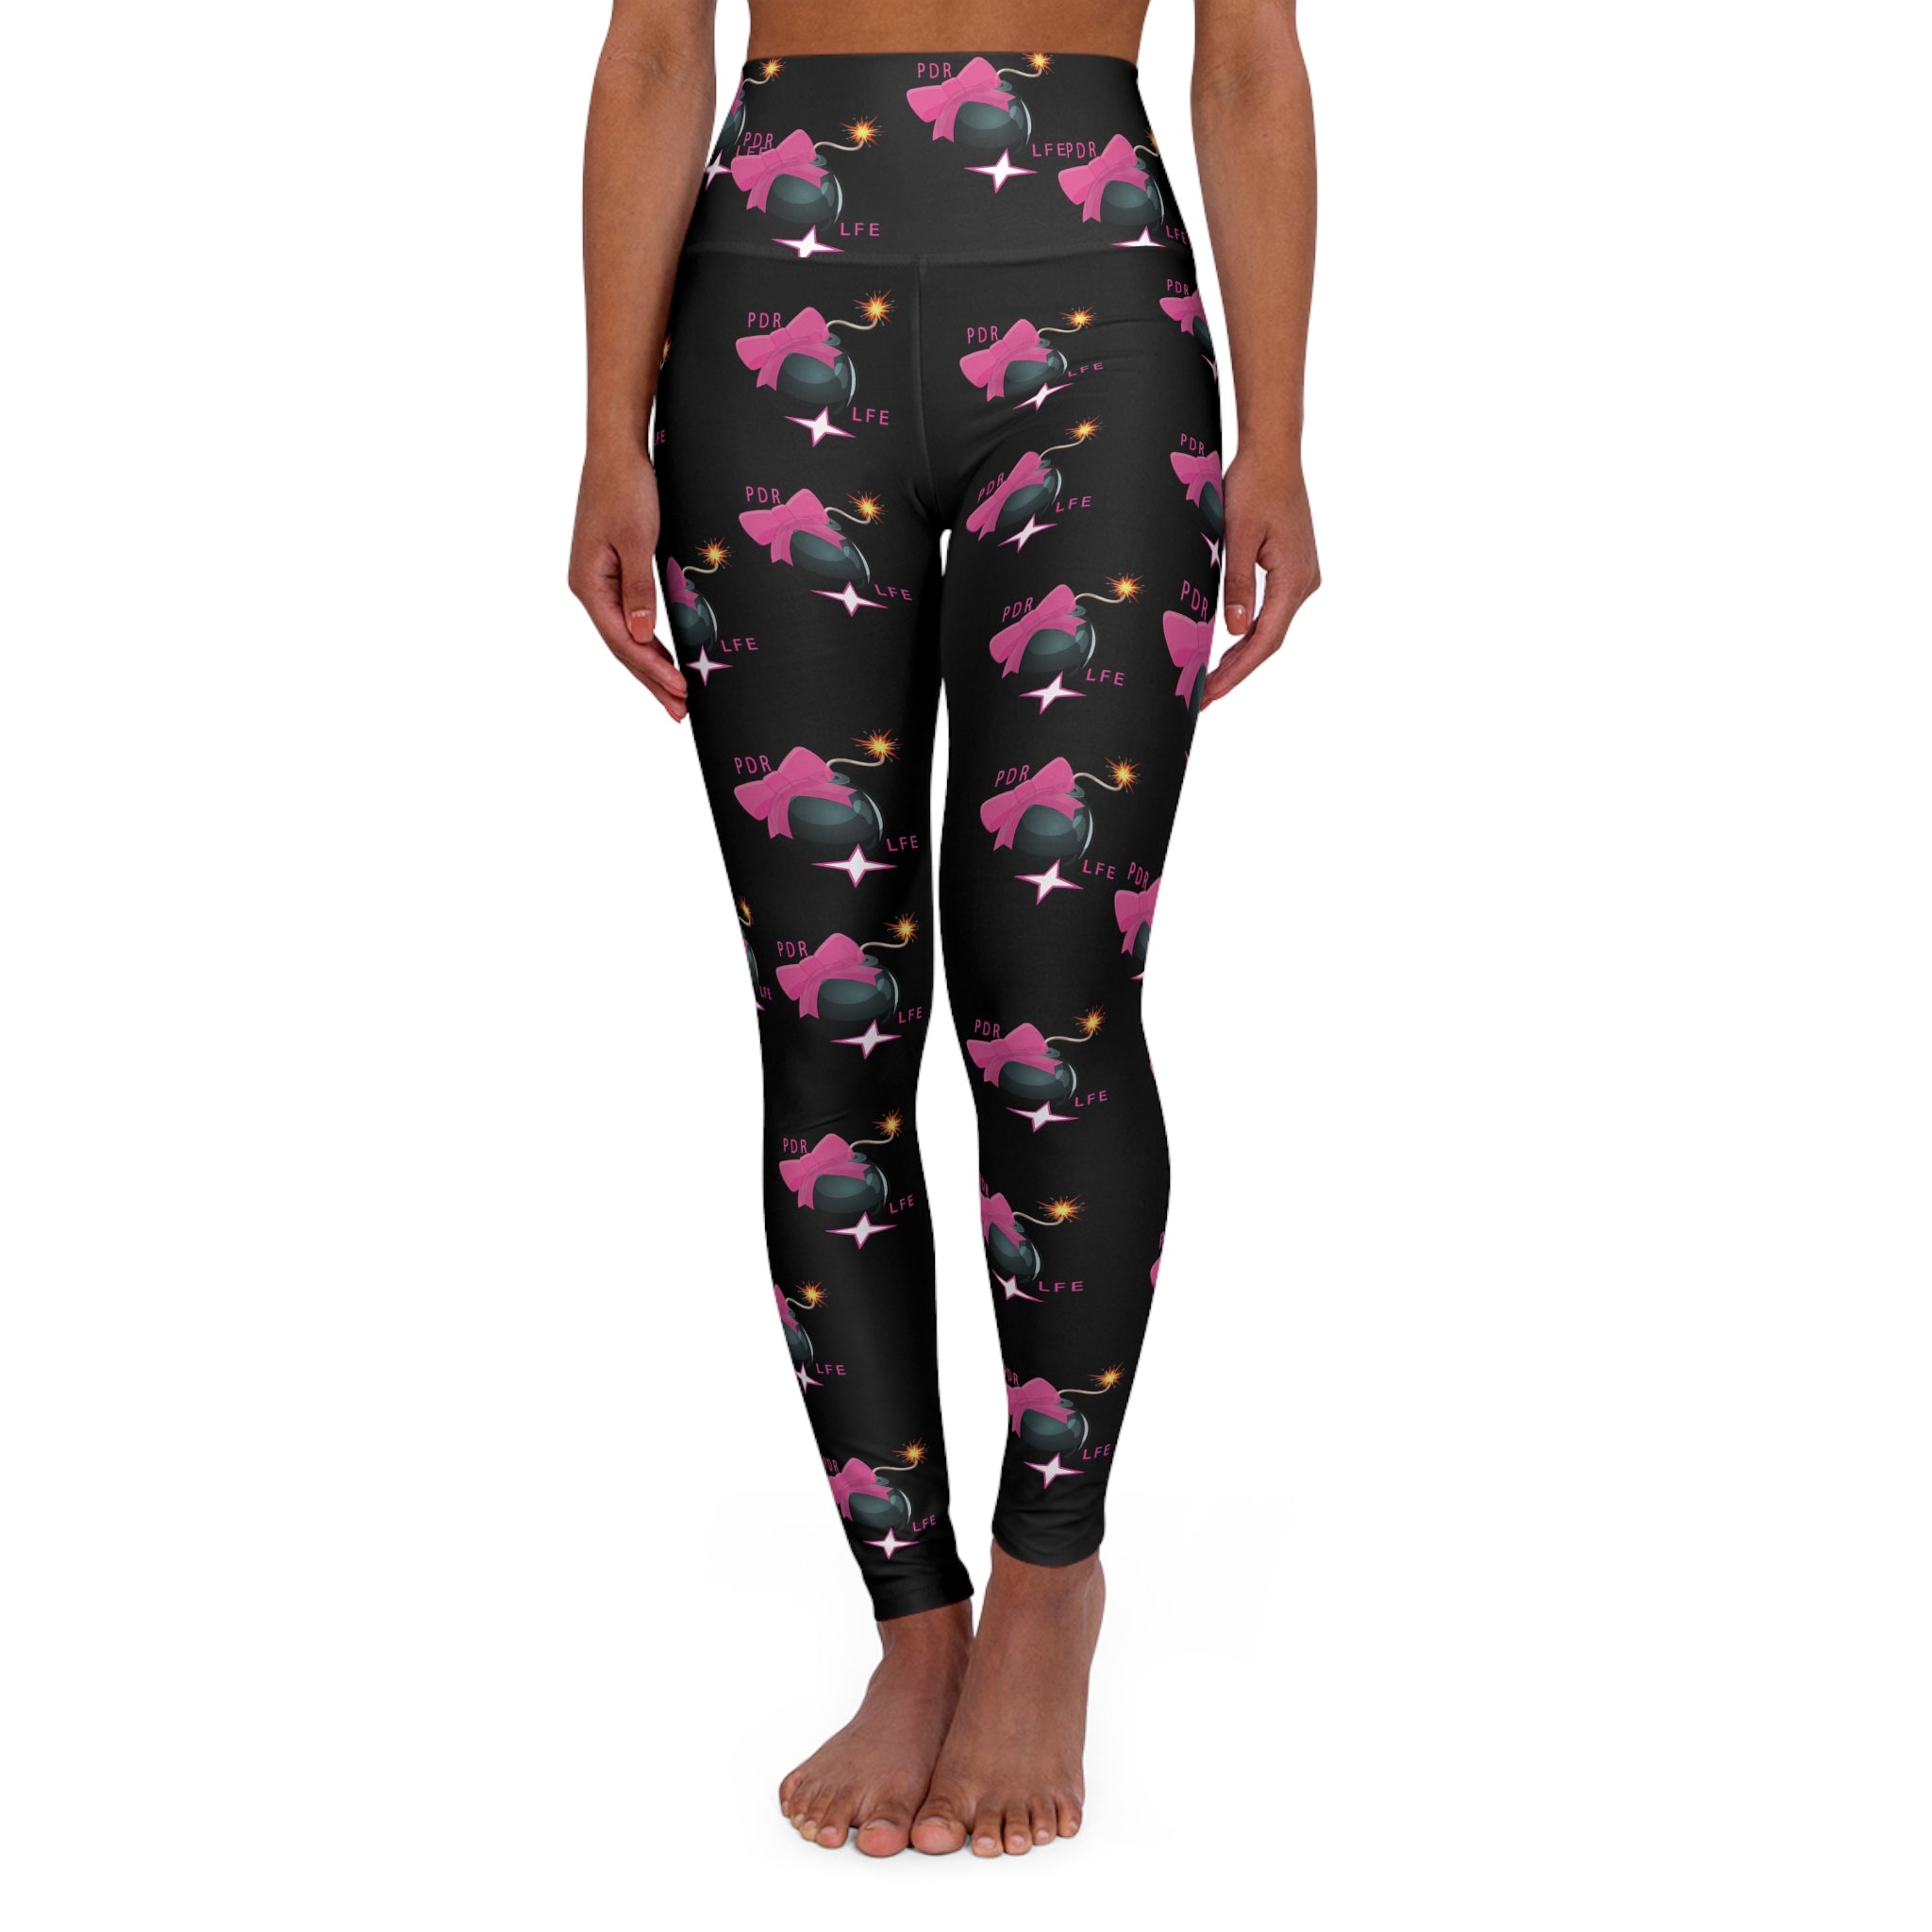 These skinny fitting high-waisted yoga leggings will take you from workout to store run in comfort and style. They are fully customizable with an all-over print that adds an instant pop to any athleisure wardrobe.<br>